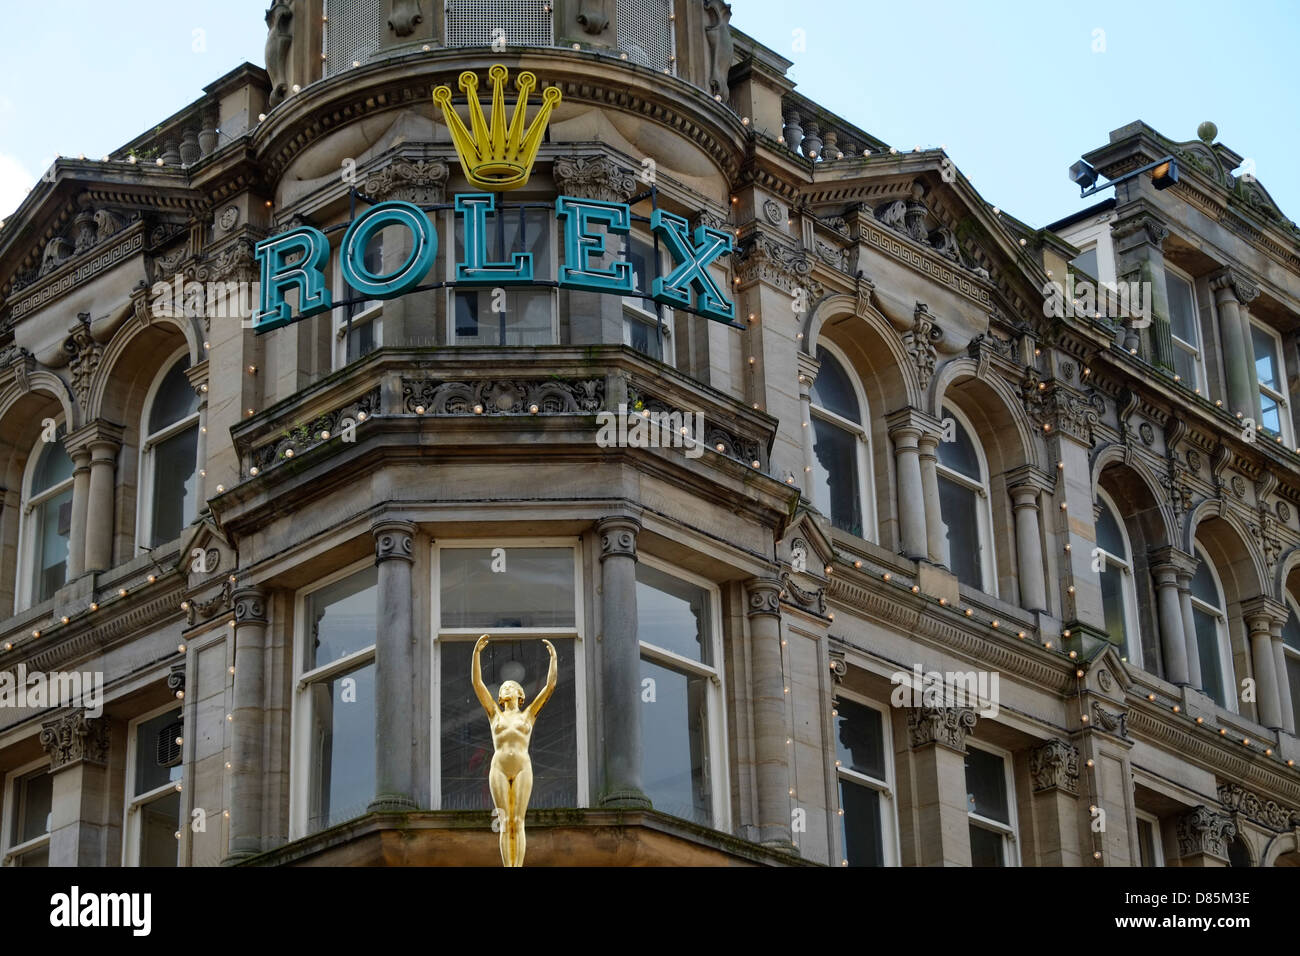 Northern Goldsmiths Jewellers, first stockists of the Rolex watch in the UK. Stock Photo